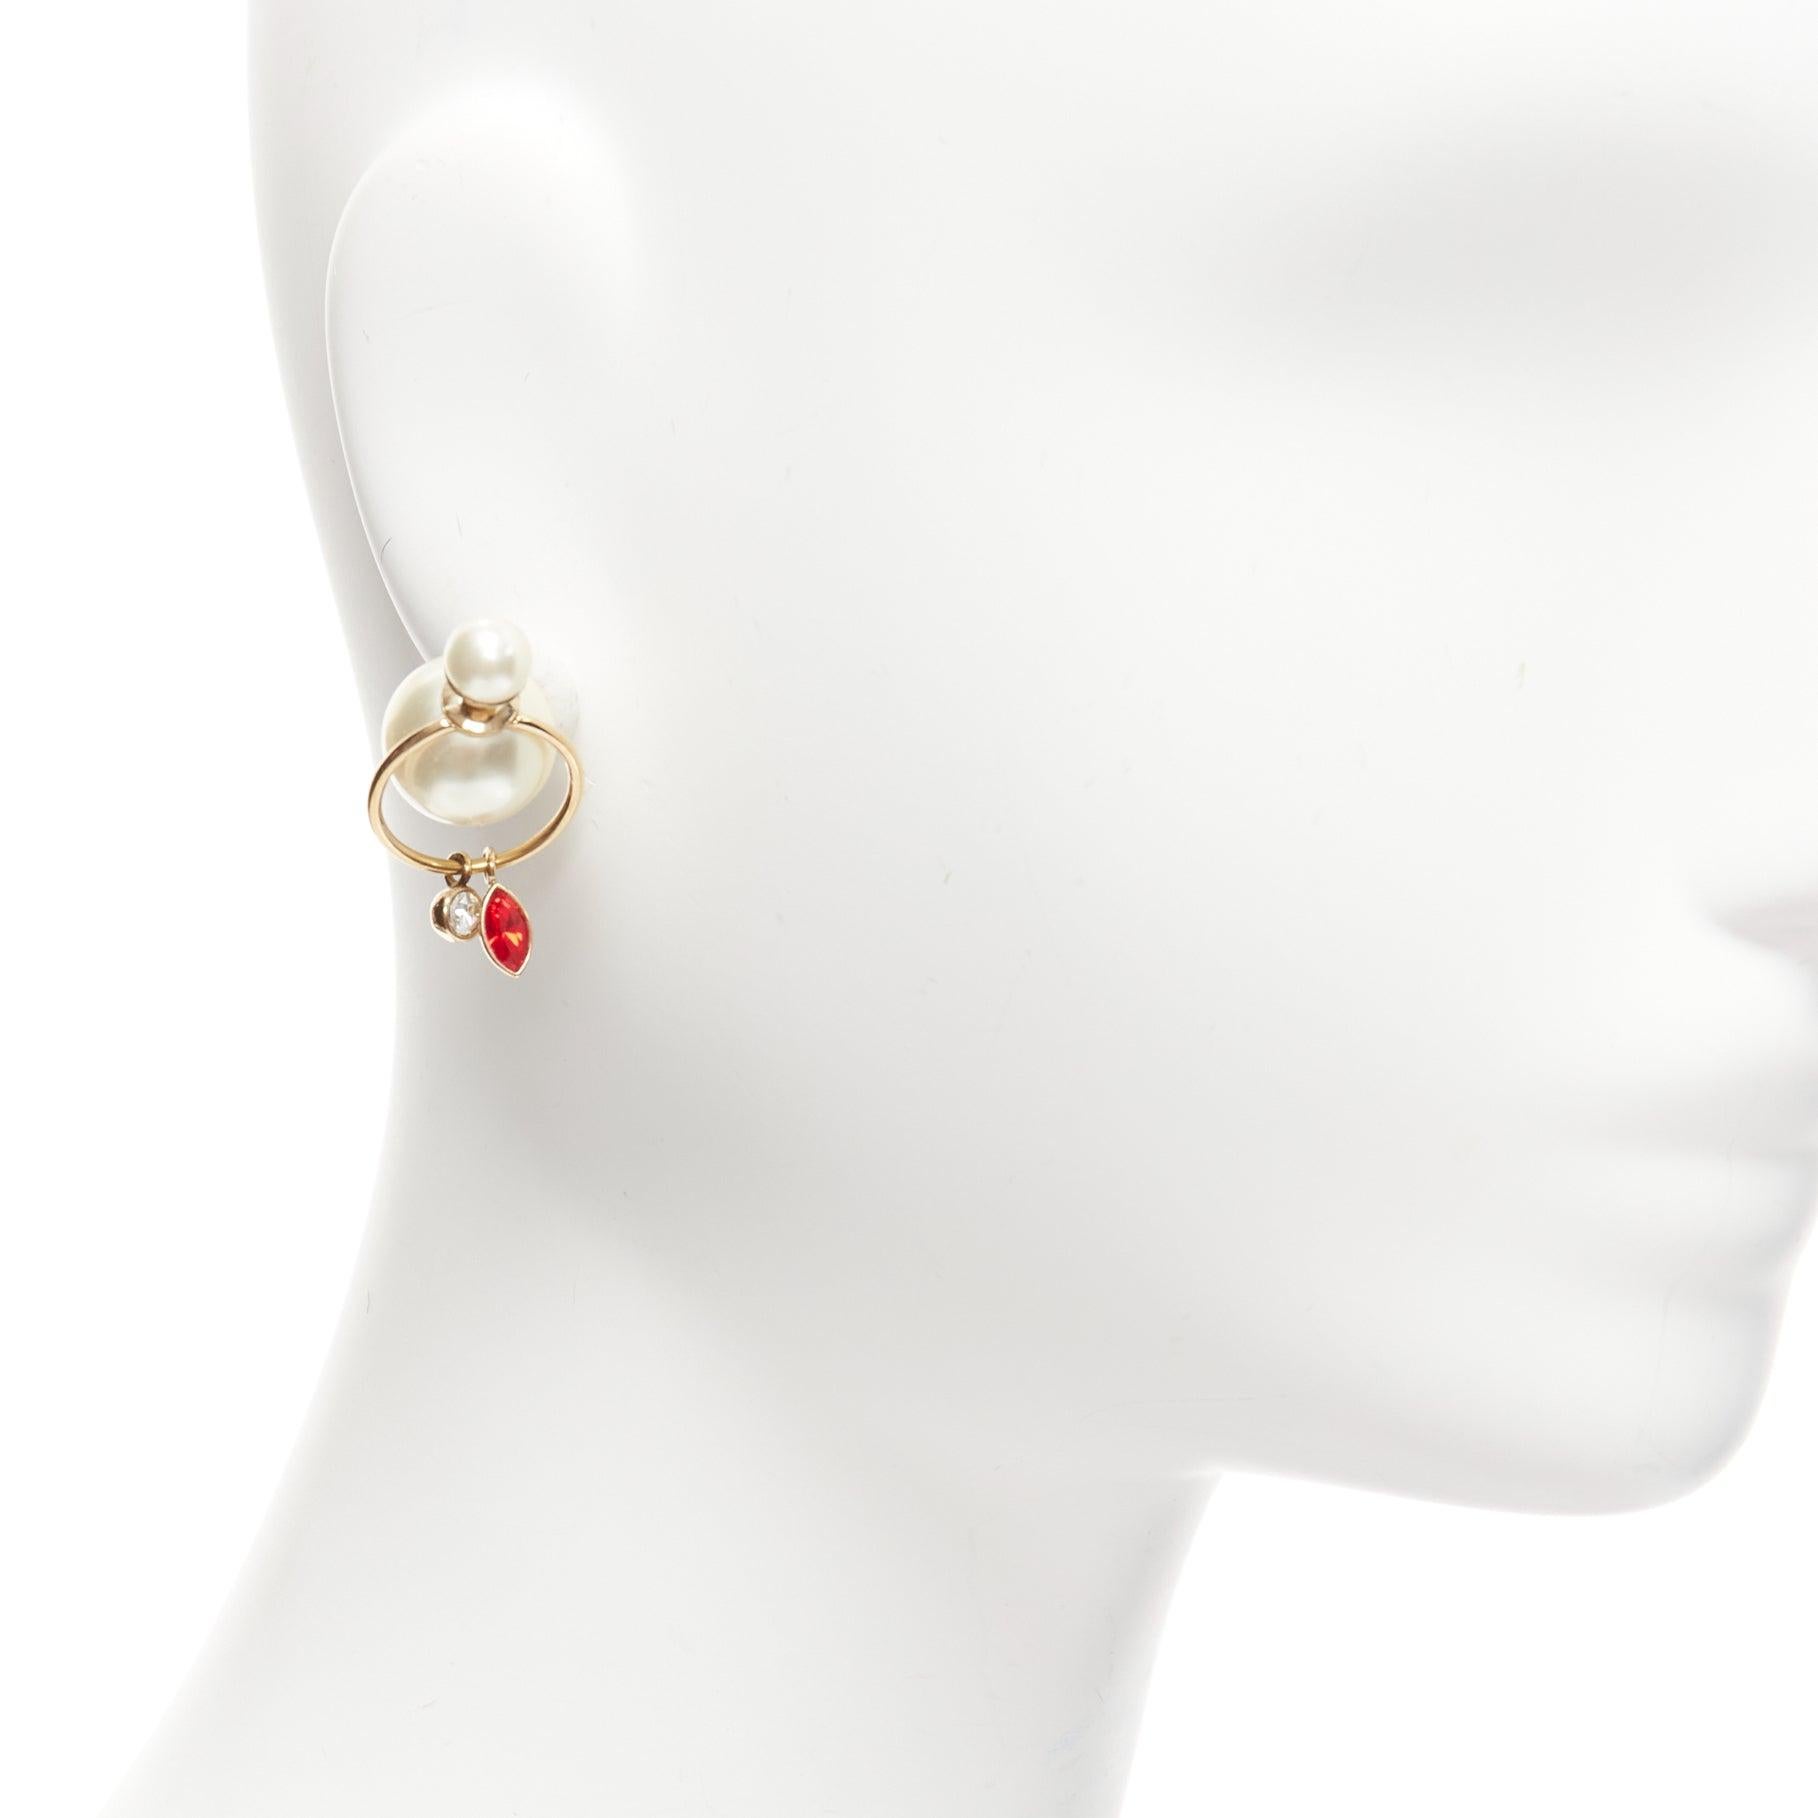 DIOR Tribale double pearl red clear crystal droplets hoop stud earrings pair
Reference: AAWC/A00914
Brand: Dior
Designer: Maria Grazia Chiuri
Material: Faux Pearl, Metal
Color: Gold, Pearl
Pattern: Solid
Closure: Pin
Lining: Gold